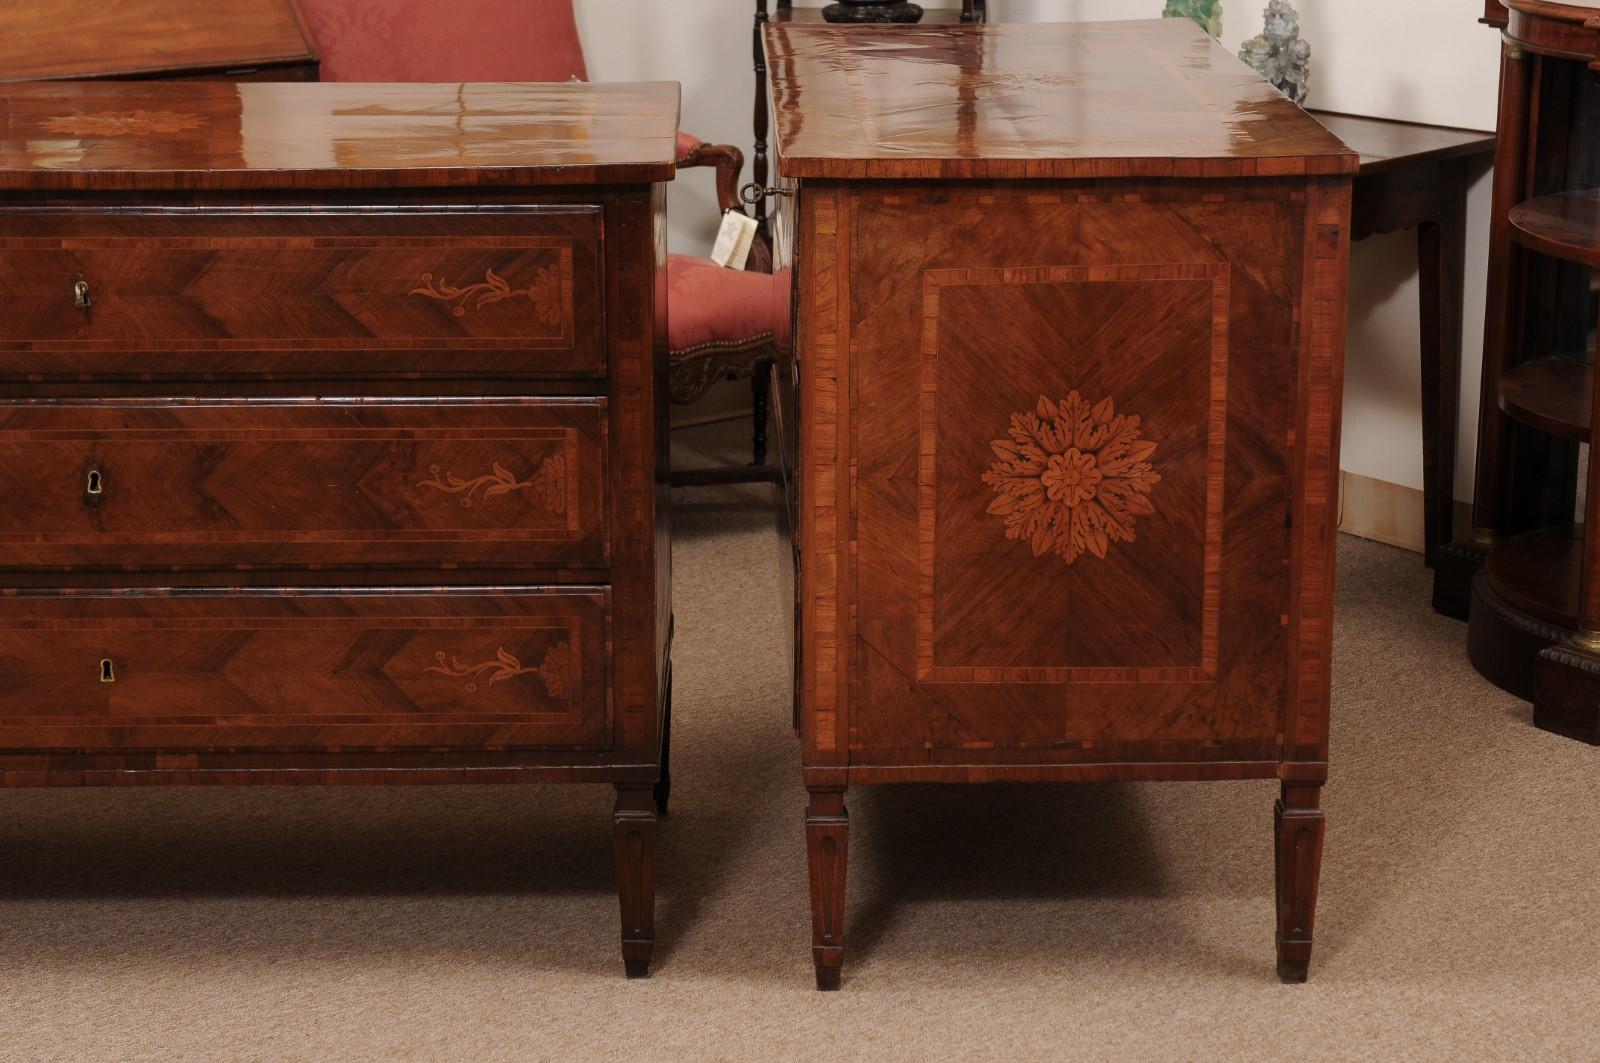 Pair of Italian Neoclassical Walnut Commodes with Foliage Design, 19th Century For Sale 11